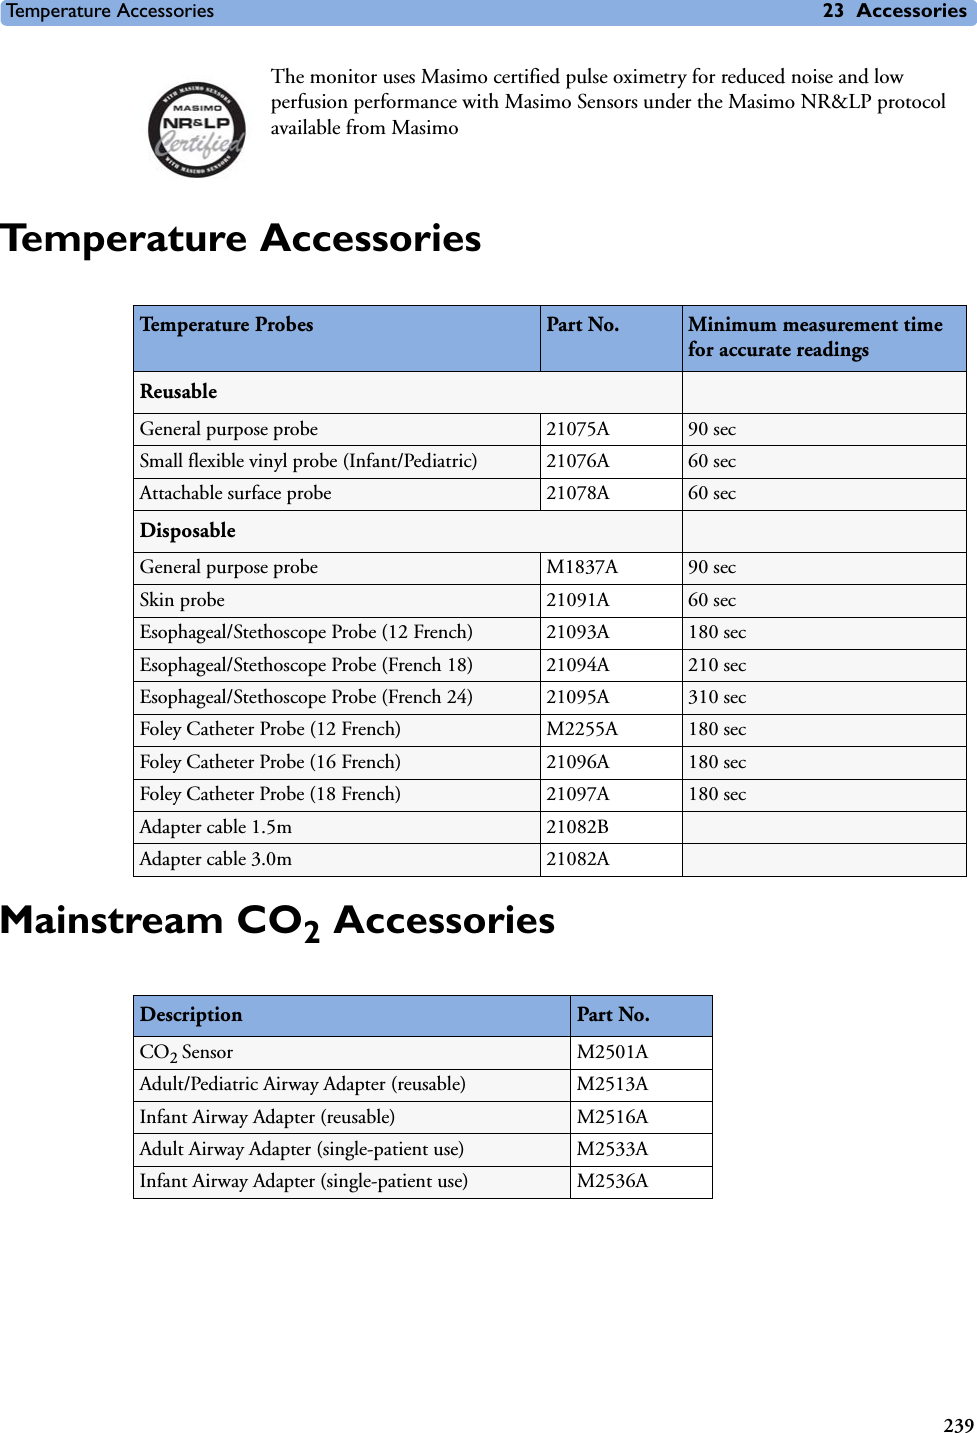 Temperature Accessories 23 Accessories239The monitor uses Masimo certified pulse oximetry for reduced noise and low perfusion performance with Masimo Sensors under the Masimo NR&amp;LP protocol available from MasimoTemperature AccessoriesMainstream CO2 AccessoriesTemperature Probes Part No.  Minimum measurement time for accurate readingsReusableGeneral purpose probe 21075A 90 secSmall flexible vinyl probe (Infant/Pediatric) 21076A 60 secAttachable surface probe 21078A 60 secDisposableGeneral purpose probe M1837A 90 secSkin probe 21091A 60 secEsophageal/Stethoscope Probe (12 French) 21093A 180 secEsophageal/Stethoscope Probe (French 18)  21094A 210 secEsophageal/Stethoscope Probe (French 24) 21095A 310 secFoley Catheter Probe (12 French) M2255A 180 secFoley Catheter Probe (16 French) 21096A 180 secFoley Catheter Probe (18 French) 21097A 180 secAdapter cable 1.5m 21082BAdapter cable 3.0m 21082ADescription Part No. CO2 Sensor M2501AAdult/Pediatric Airway Adapter (reusable) M2513AInfant Airway Adapter (reusable) M2516AAdult Airway Adapter (single-patient use) M2533AInfant Airway Adapter (single-patient use) M2536A